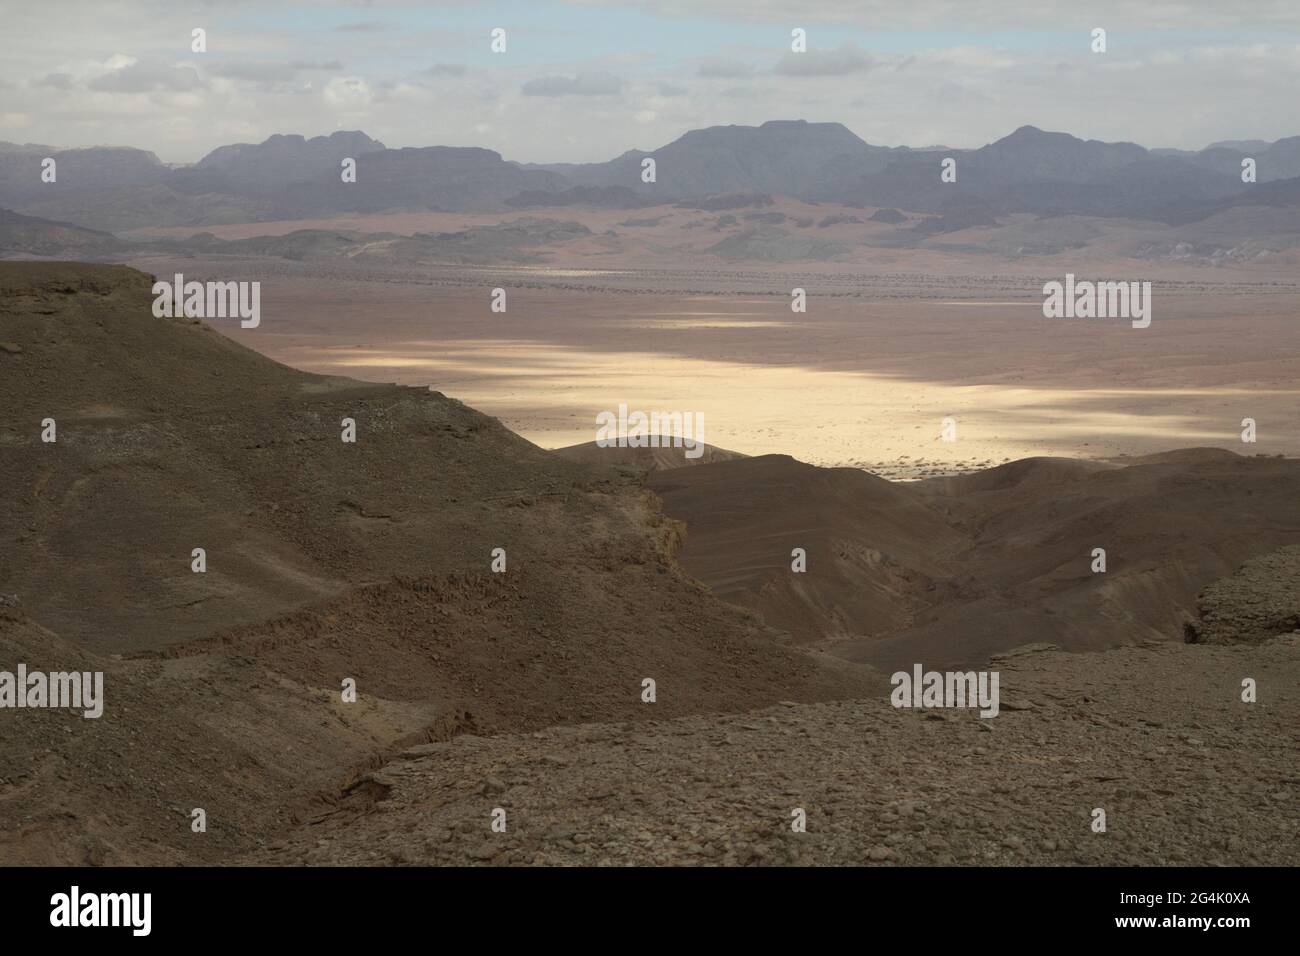 Arava Valley, in Jordan Valley, in Rift Valley & Edom Mts. seen from Ketura Heights in Eilat Mts., nice partly cloudy sky, patches of light & shadows. Stock Photo